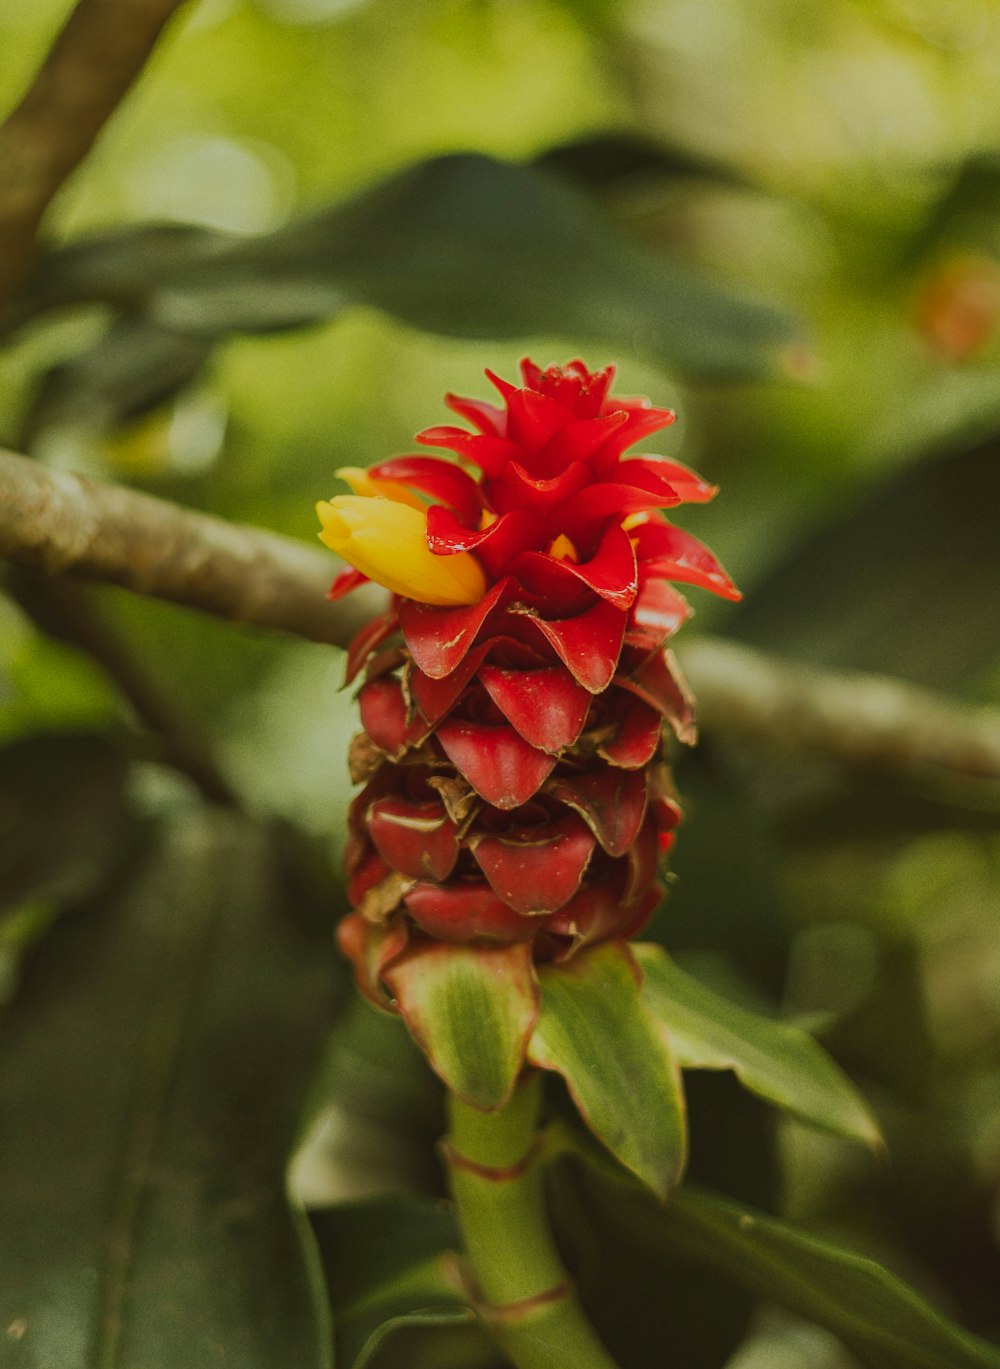 a red and yellow flower on a tree branch